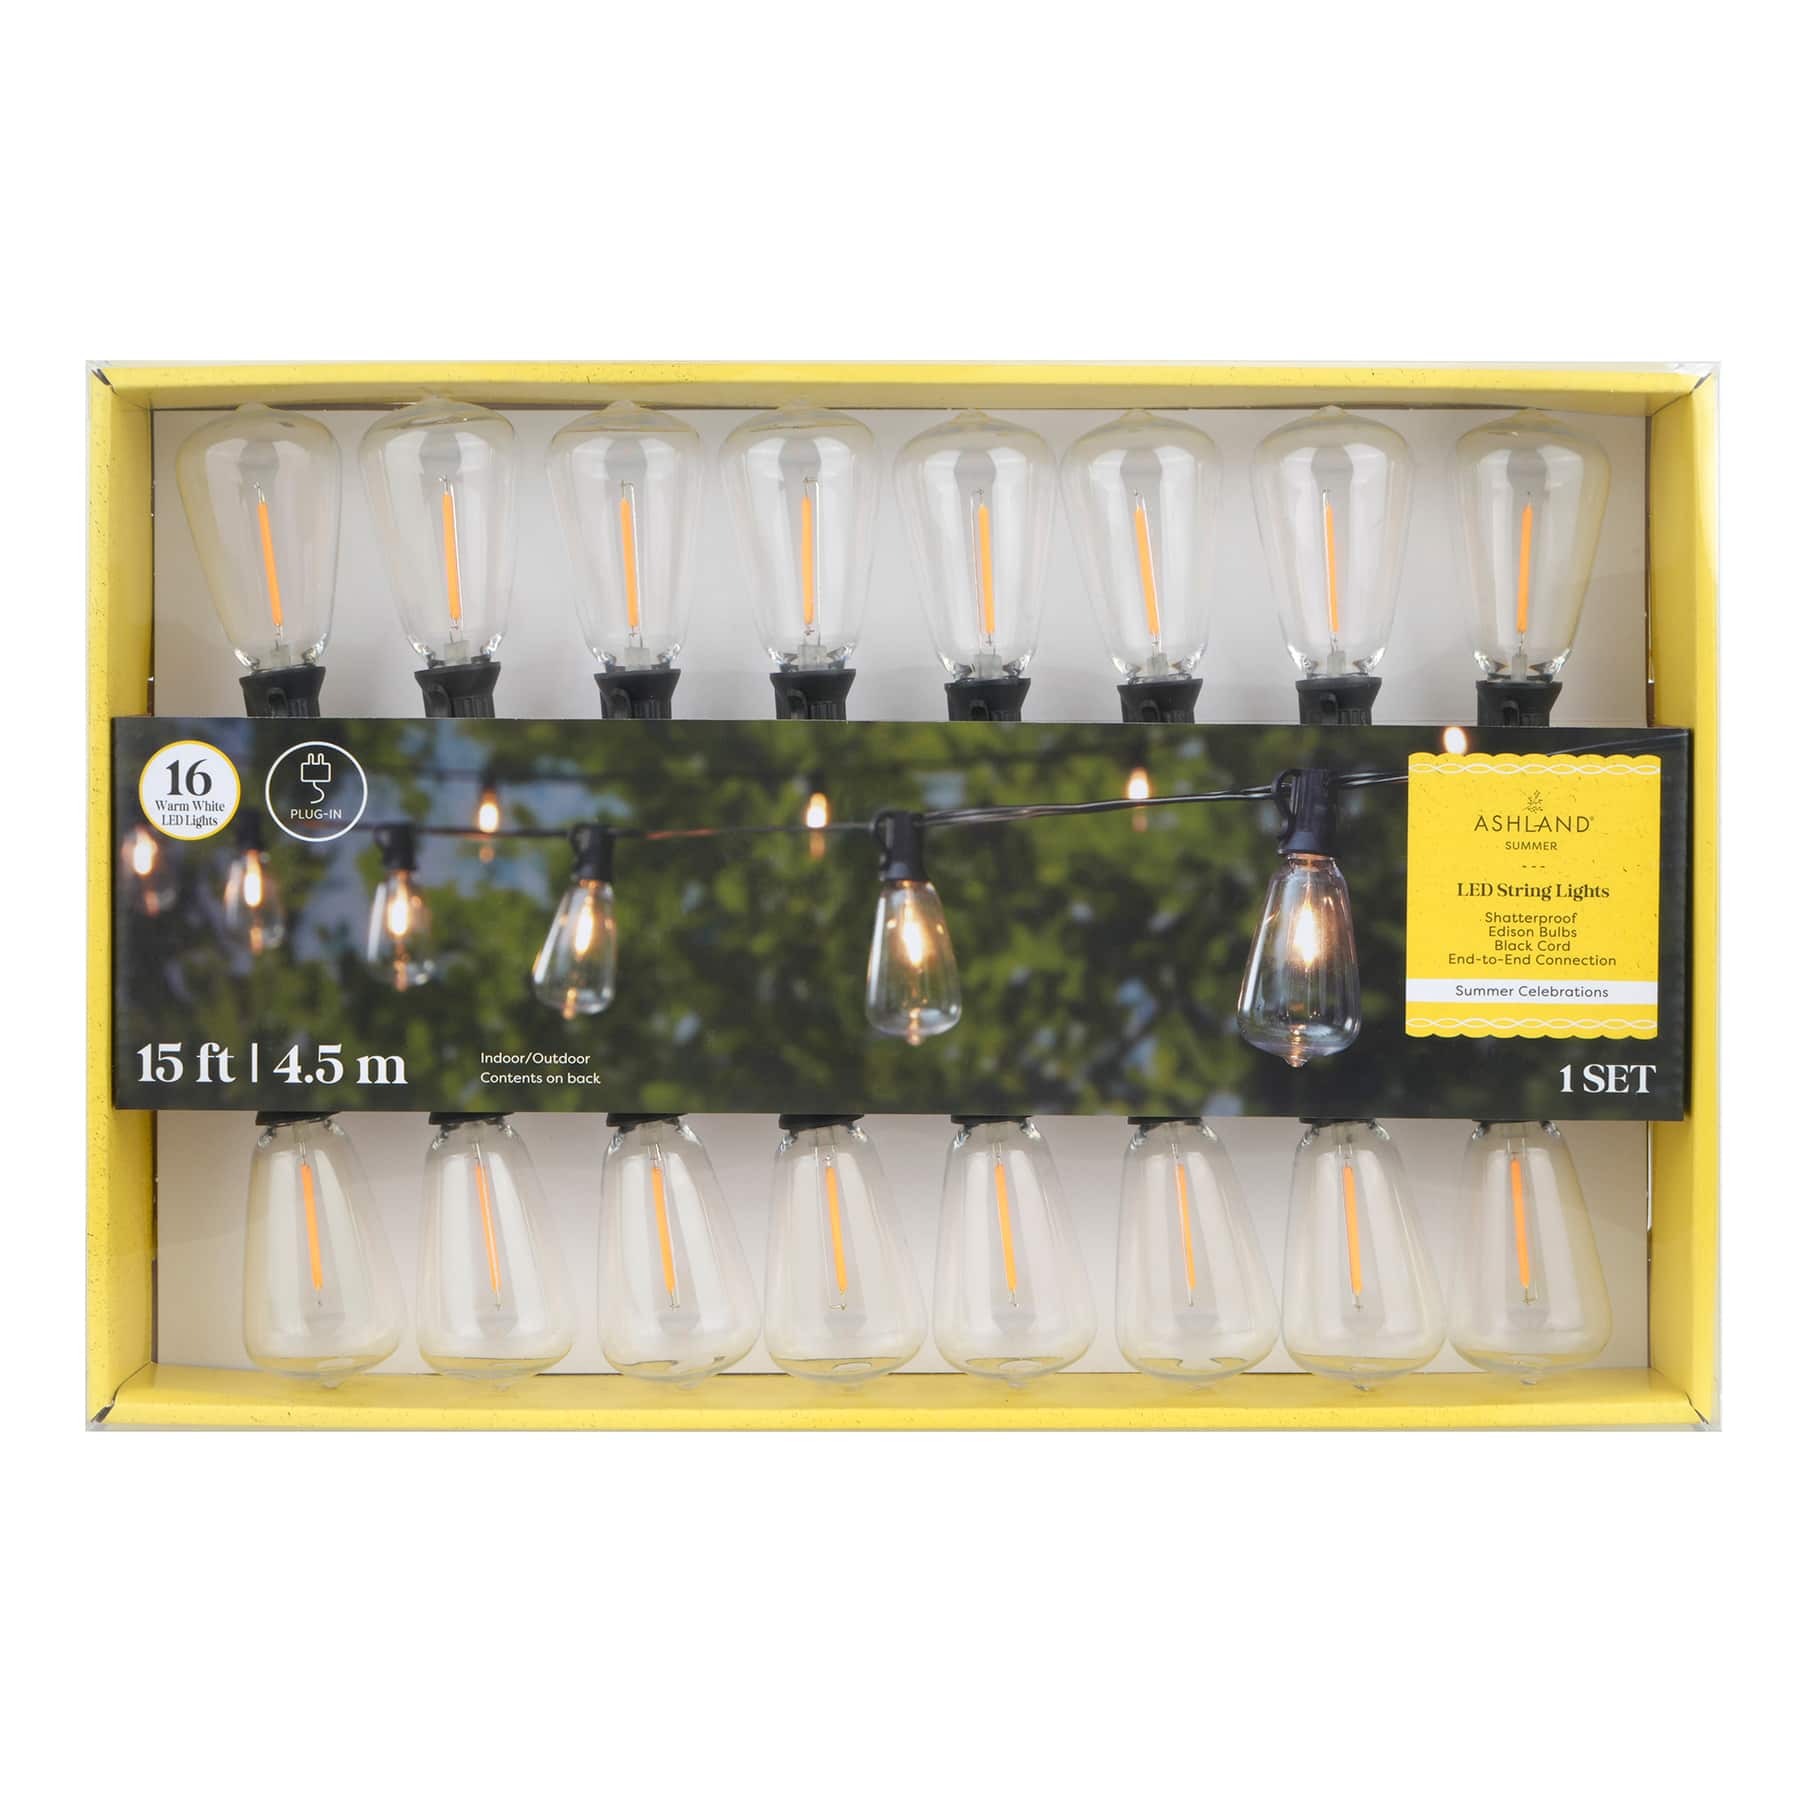 16ct. Warm White LED Shatterproof Edison Bulb String Lights with Black Wire by Ashland&#xAE;